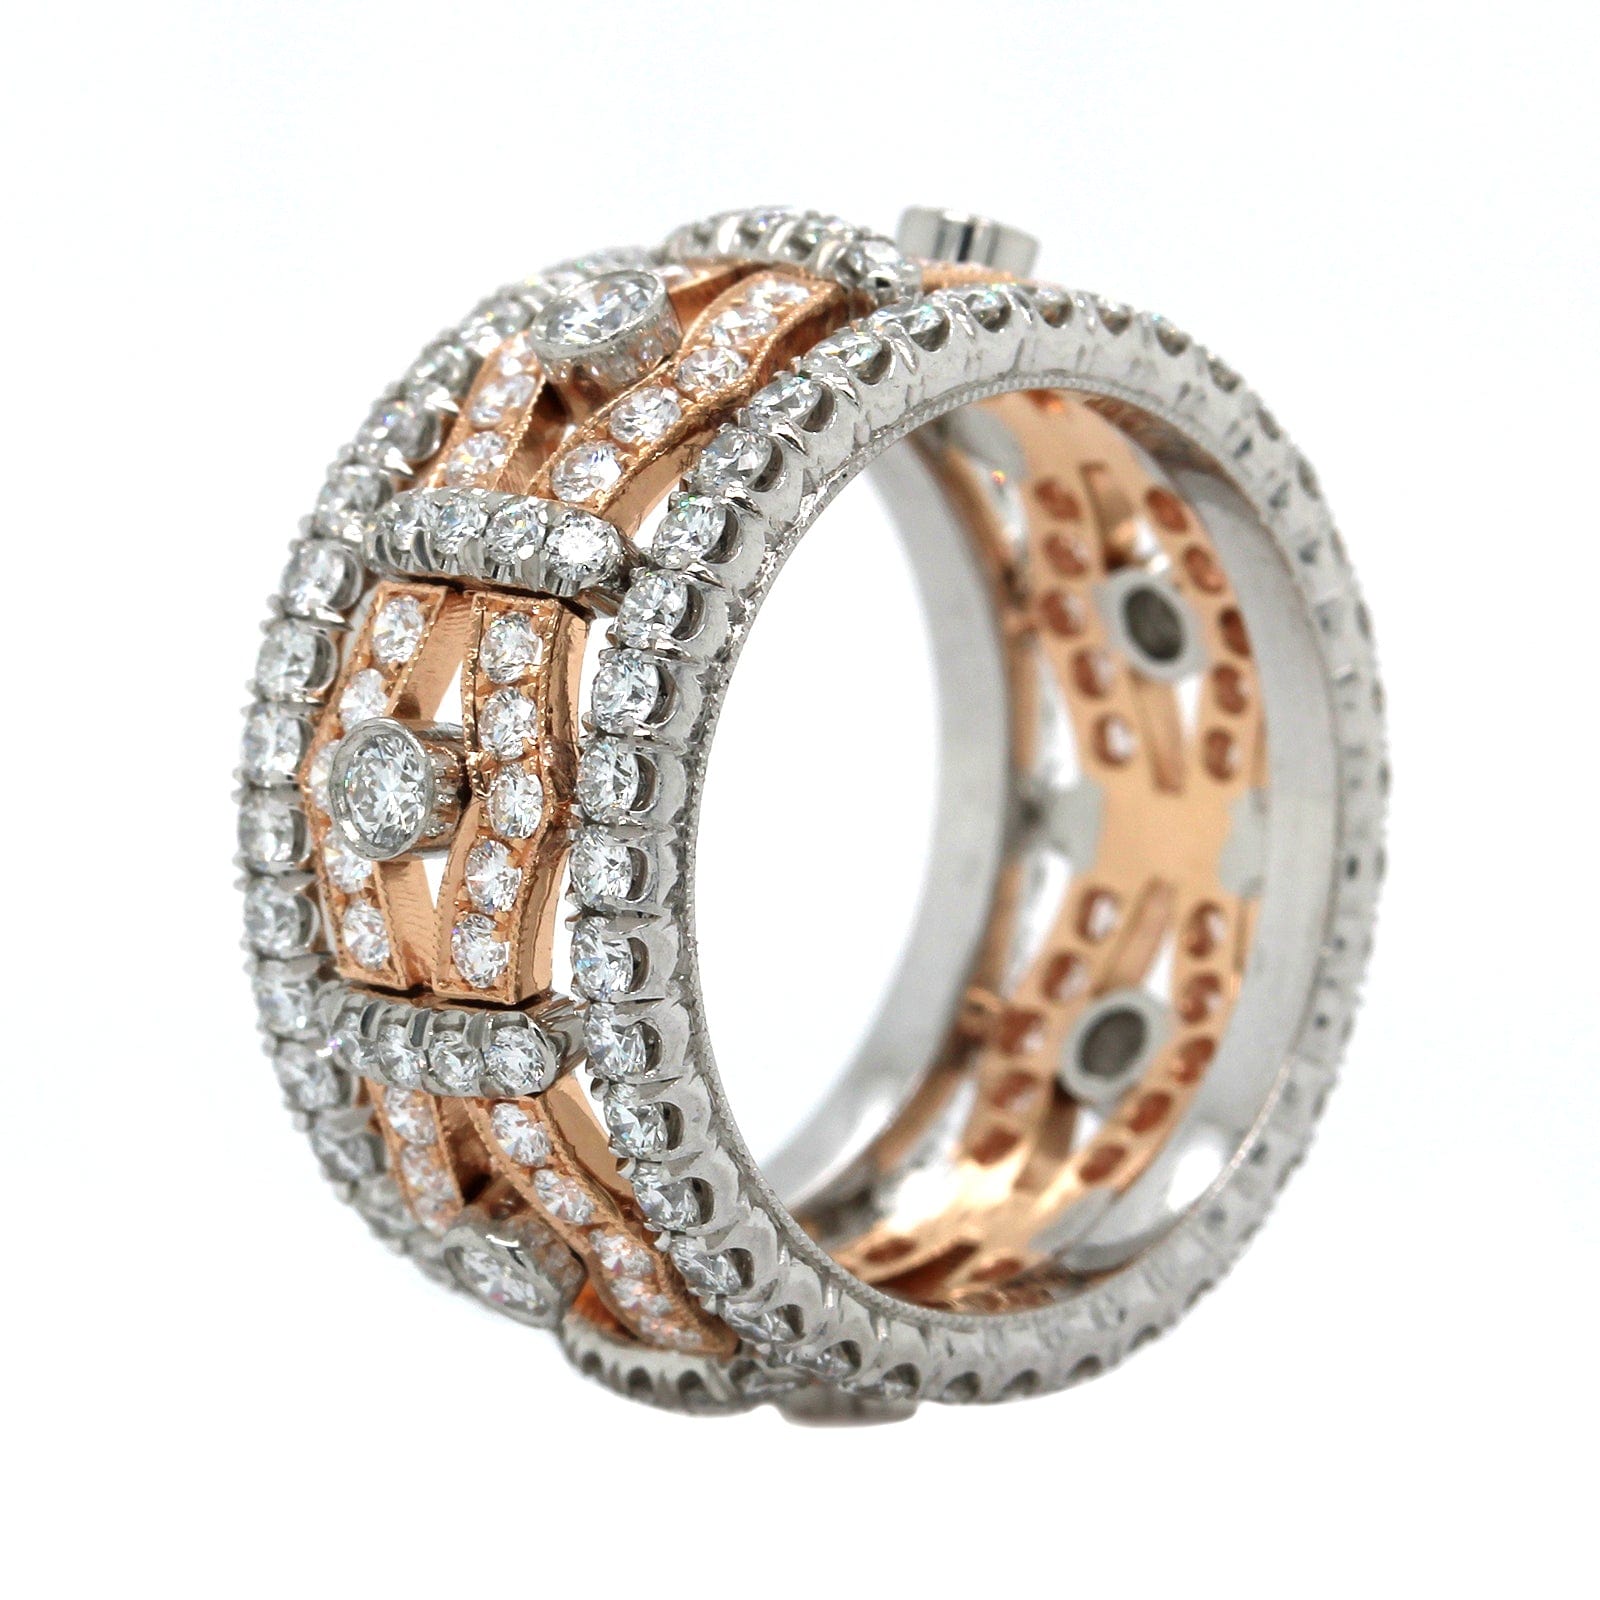 Platinum and 18K Rose Gold Wide Diamond Band, Platinum and 18k rose gold, Long's Jewelers